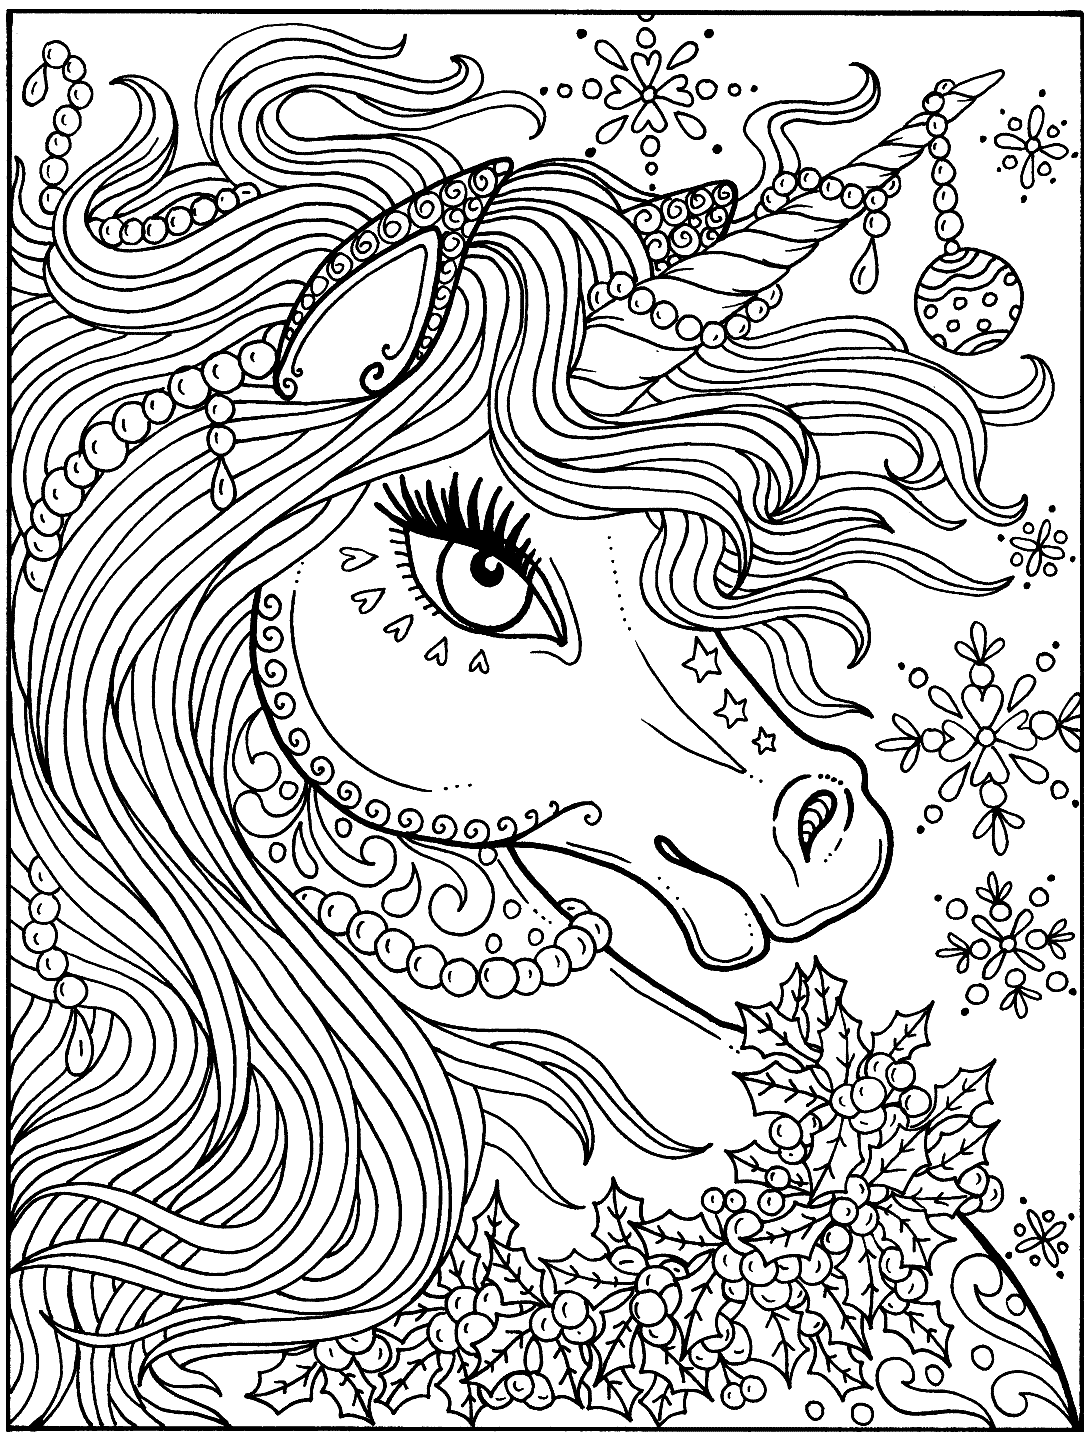 unicorn coloring book | unicorn coloring pages for adults | fairy and unicorn coloring pages